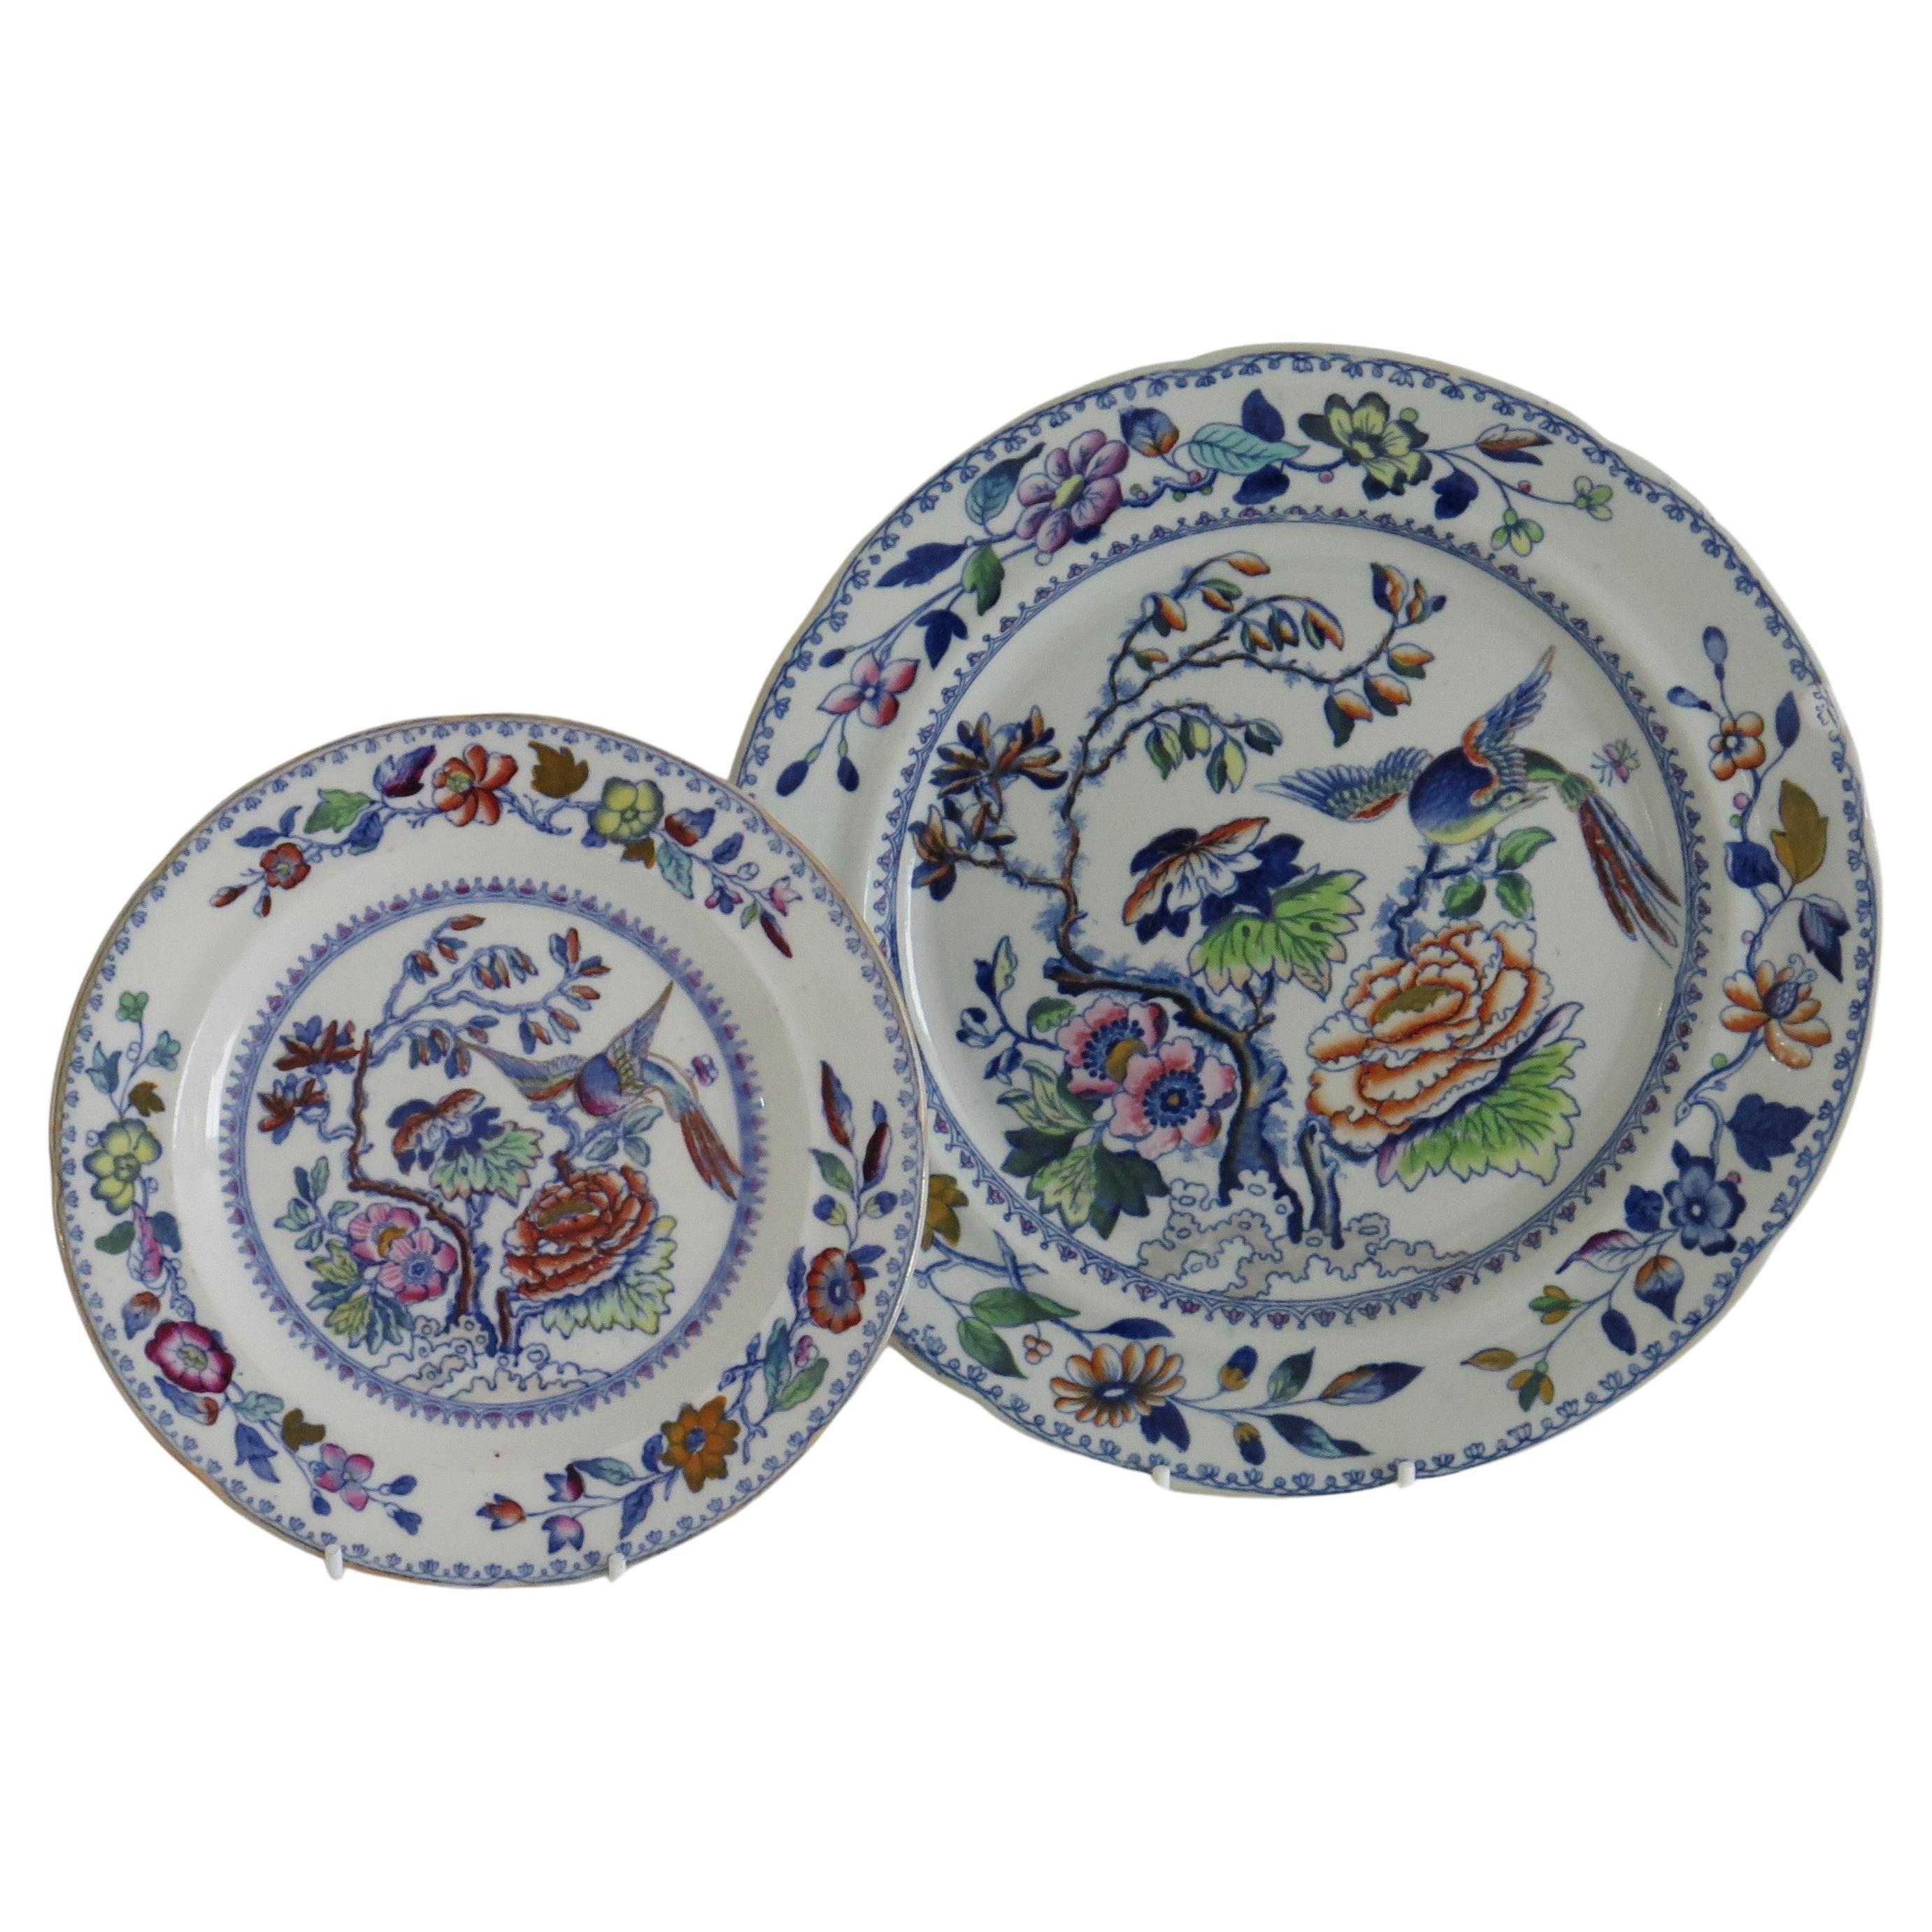 This is two English ironstone plates; one dinner plate by Davenport and one side plate by Mason's, both in the flying Bird gilded pattern.

Both plates are well potted and hand painted, probably over a blue printed outline, with enamels of